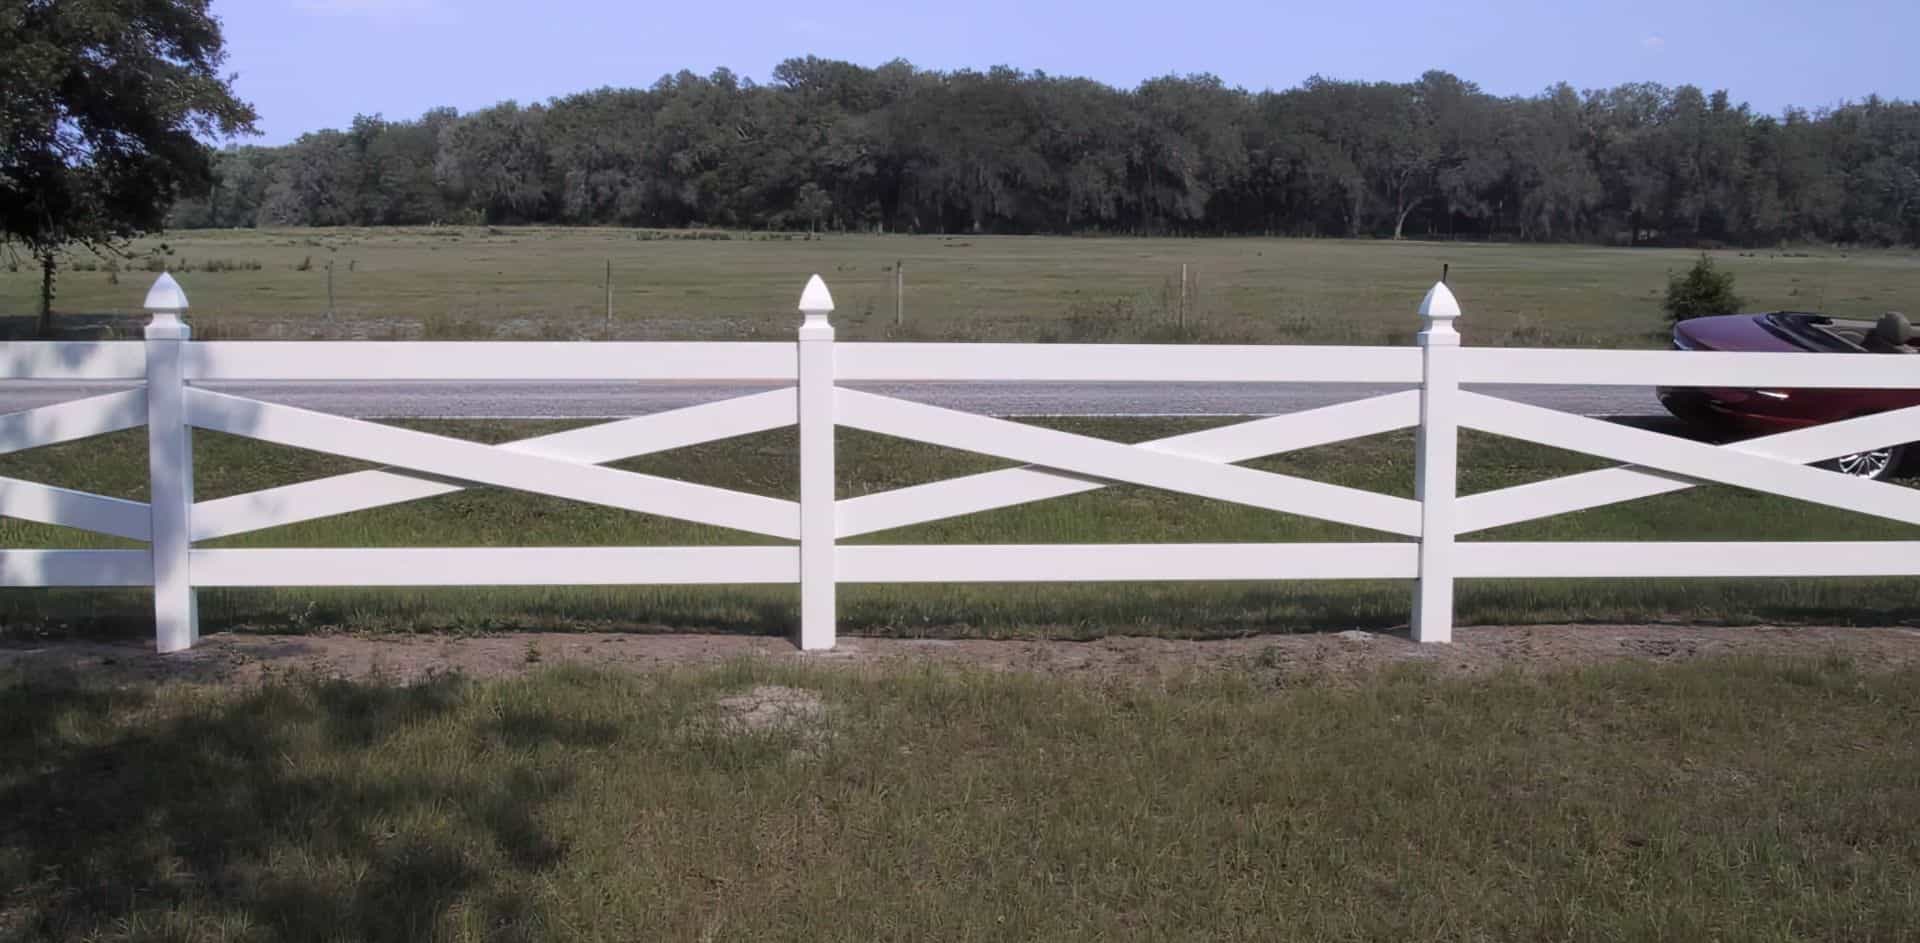 Vinyl cross rail ranch style fence on private grassy lawn far away from road with many trees in the background